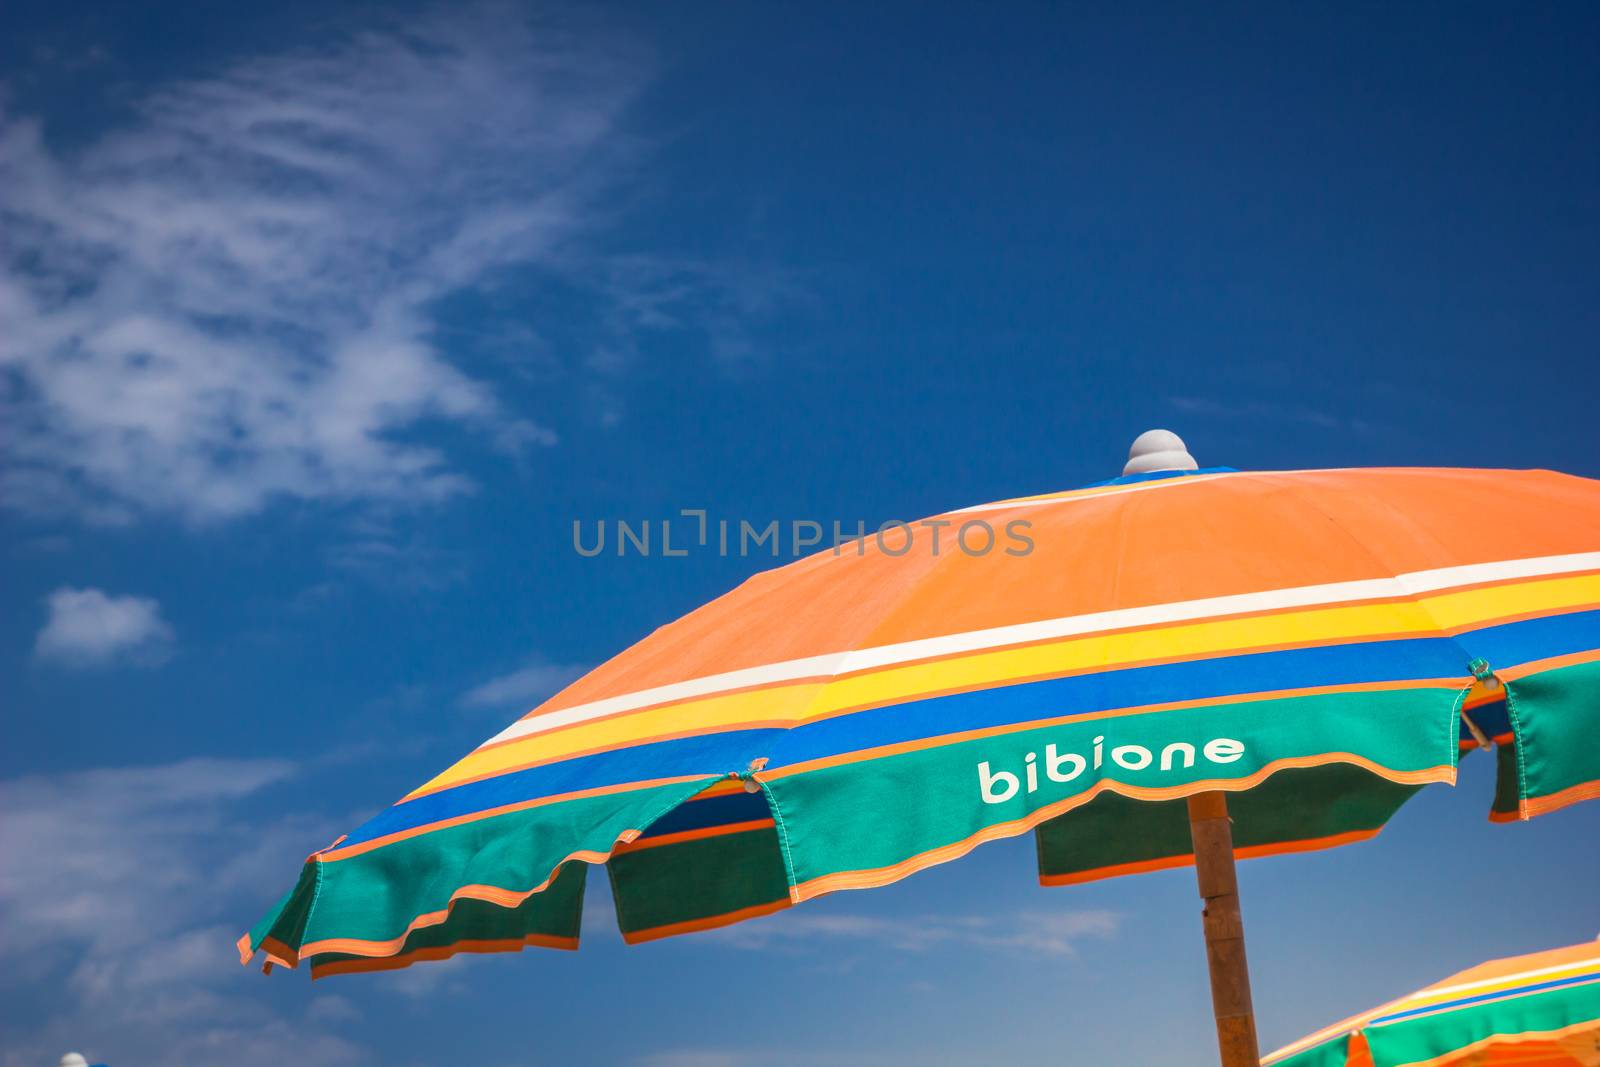 Umbrella beach for relaxing and sun set beach against blue sky. Bibione, Italy by petrsvoboda91